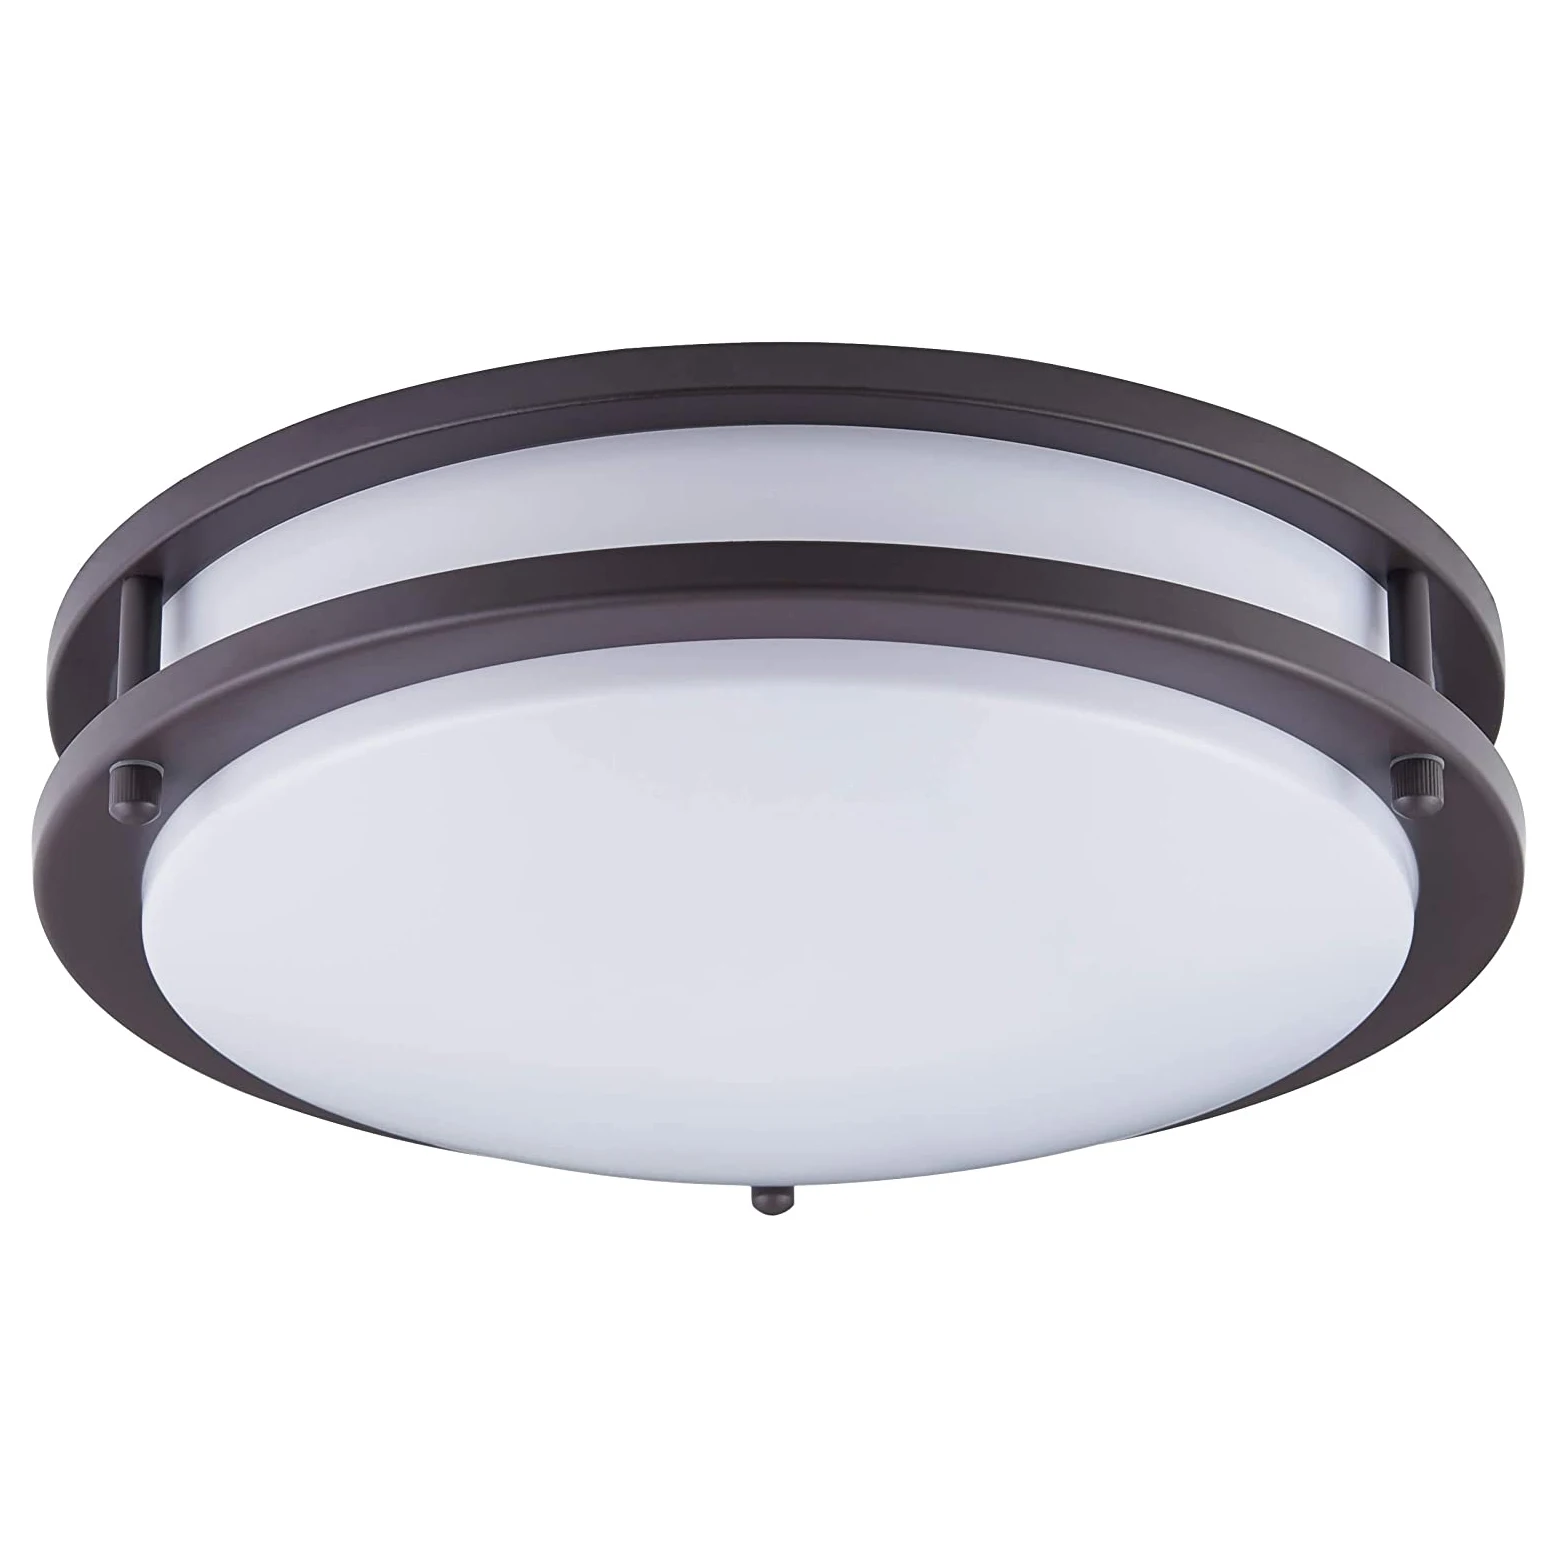 

LED Ceiling Light 12" 15W Dimmable Ceiling Lamp Round Flush Mount Ceiling Lighting fixture with ETL listed